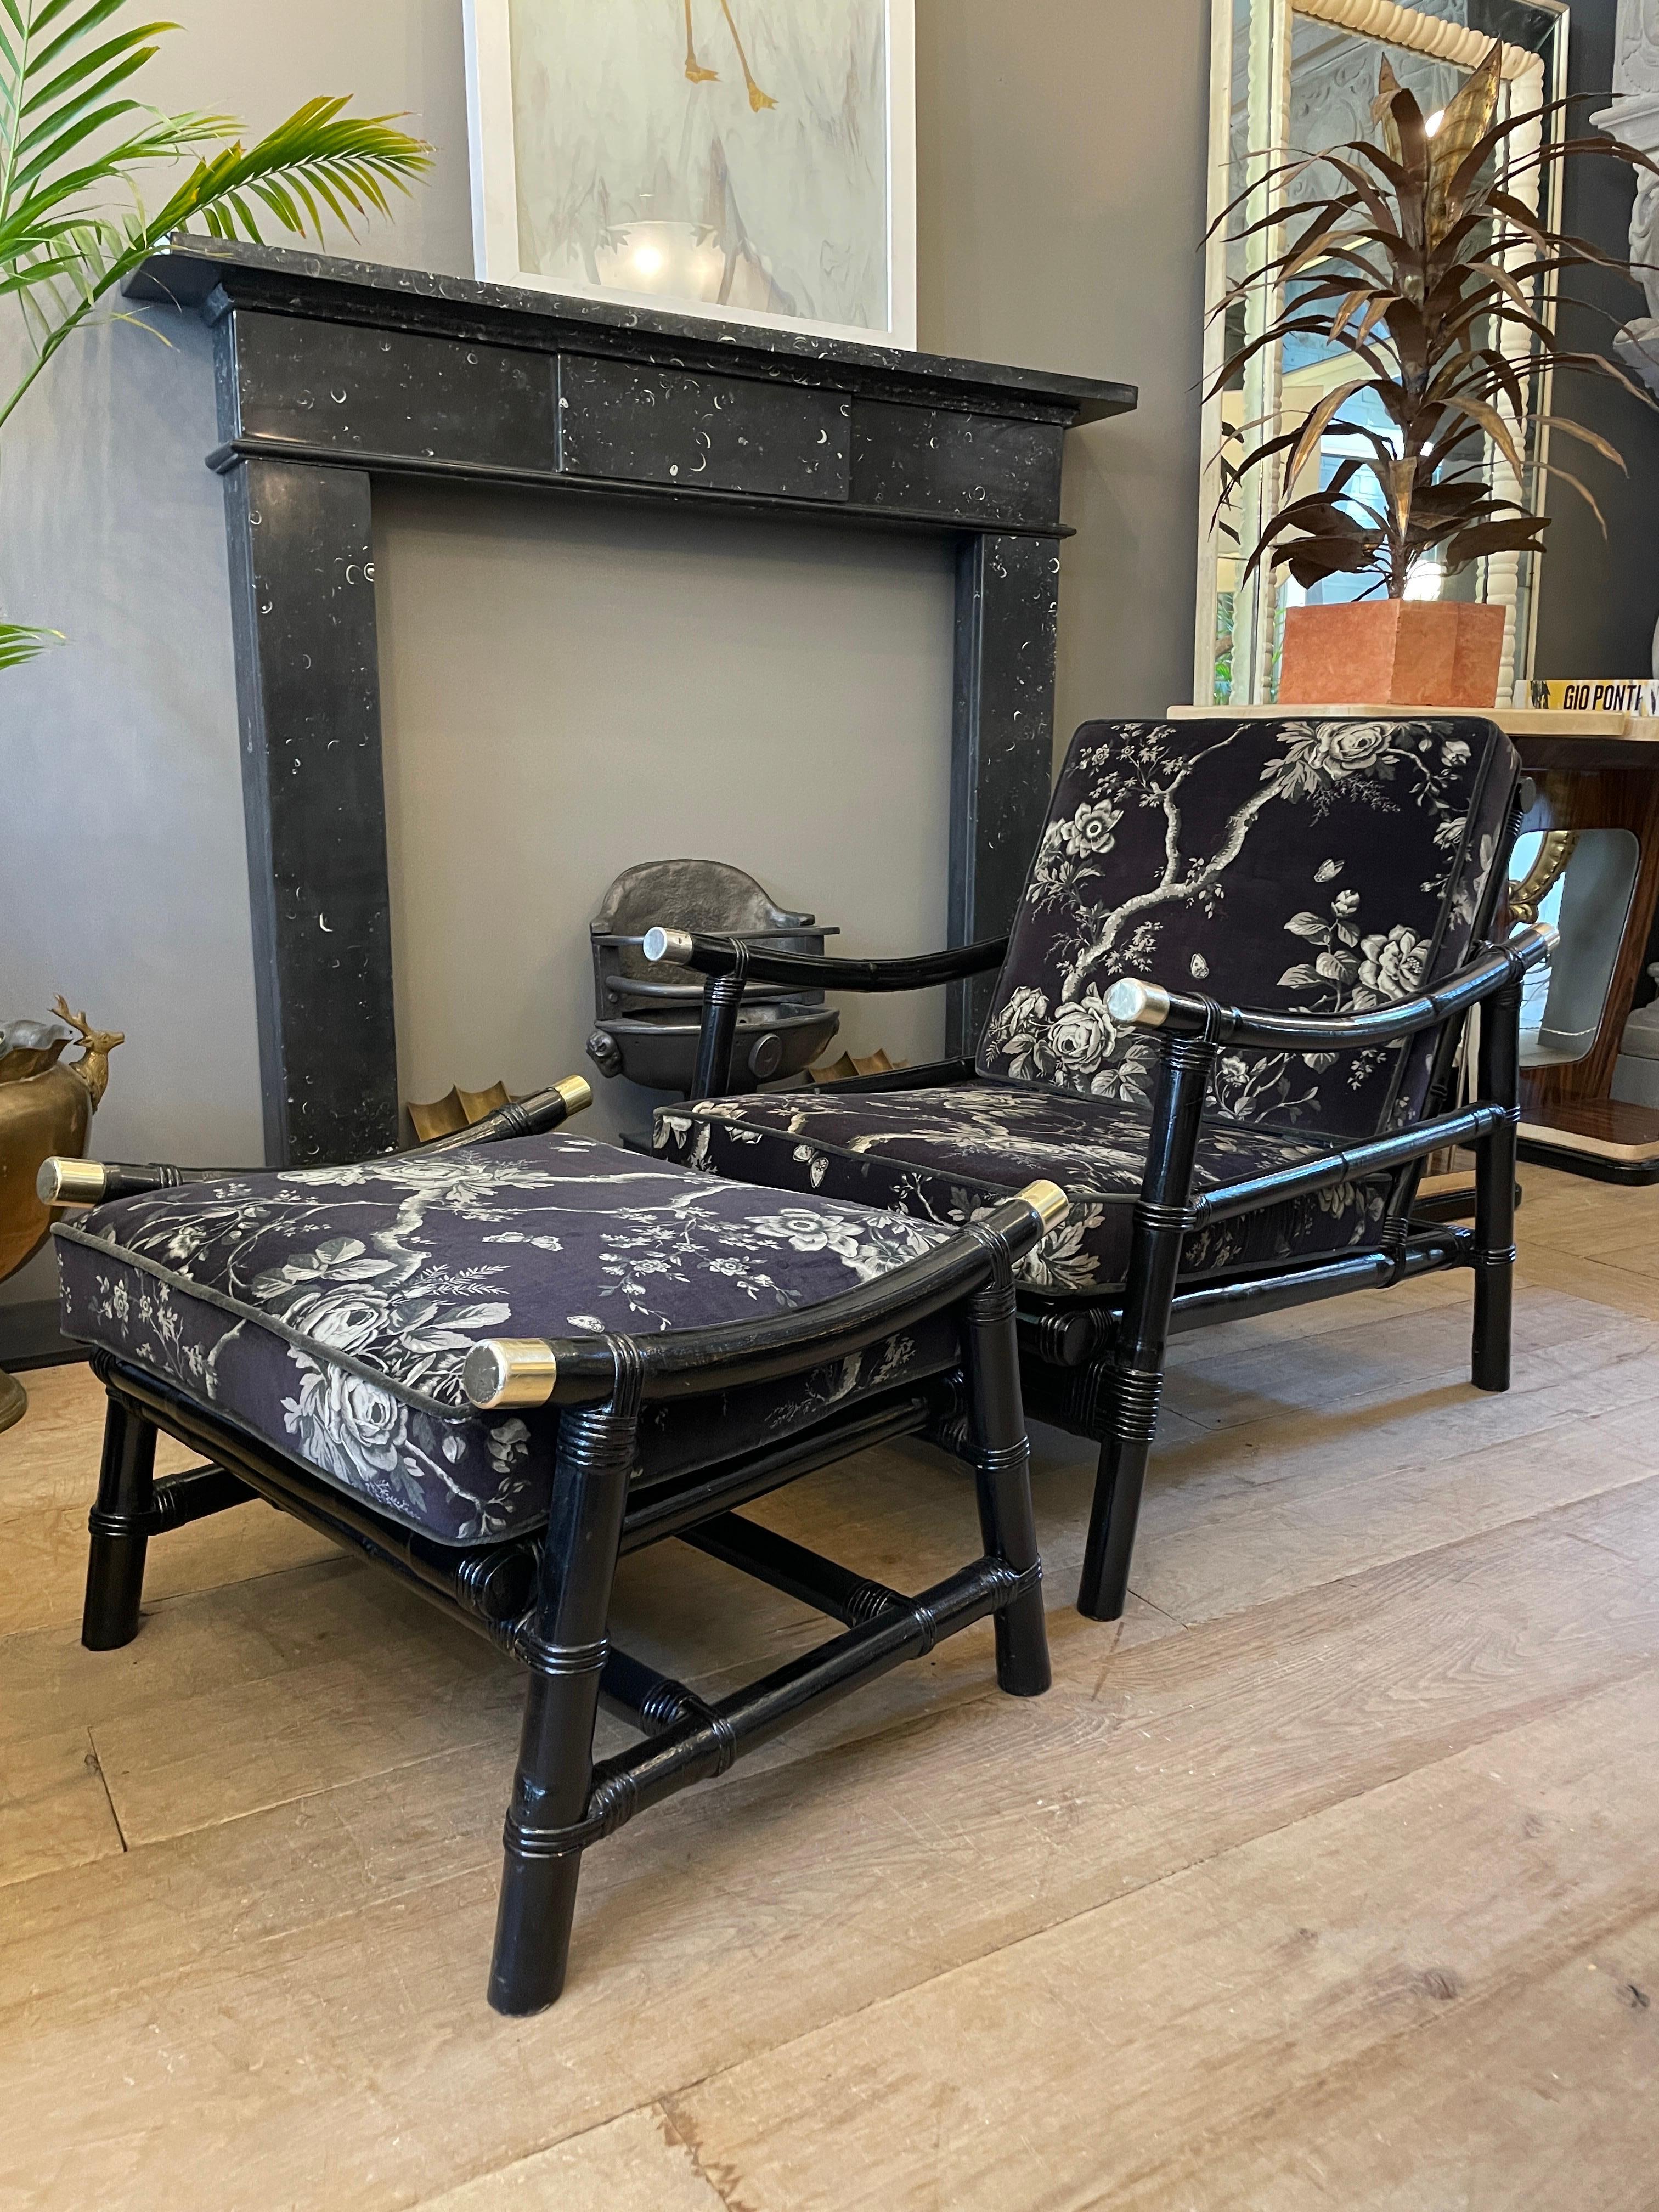 A pair of Original Ebinized Bamboo and Rattan lounge chairs by John Wisner for Ficks Reed, Far Horizon collection. Upholstered in Purple and silver floral Ralph Lauren Velvet. Accompanied by matching foot stools, in great condition, some wear to the